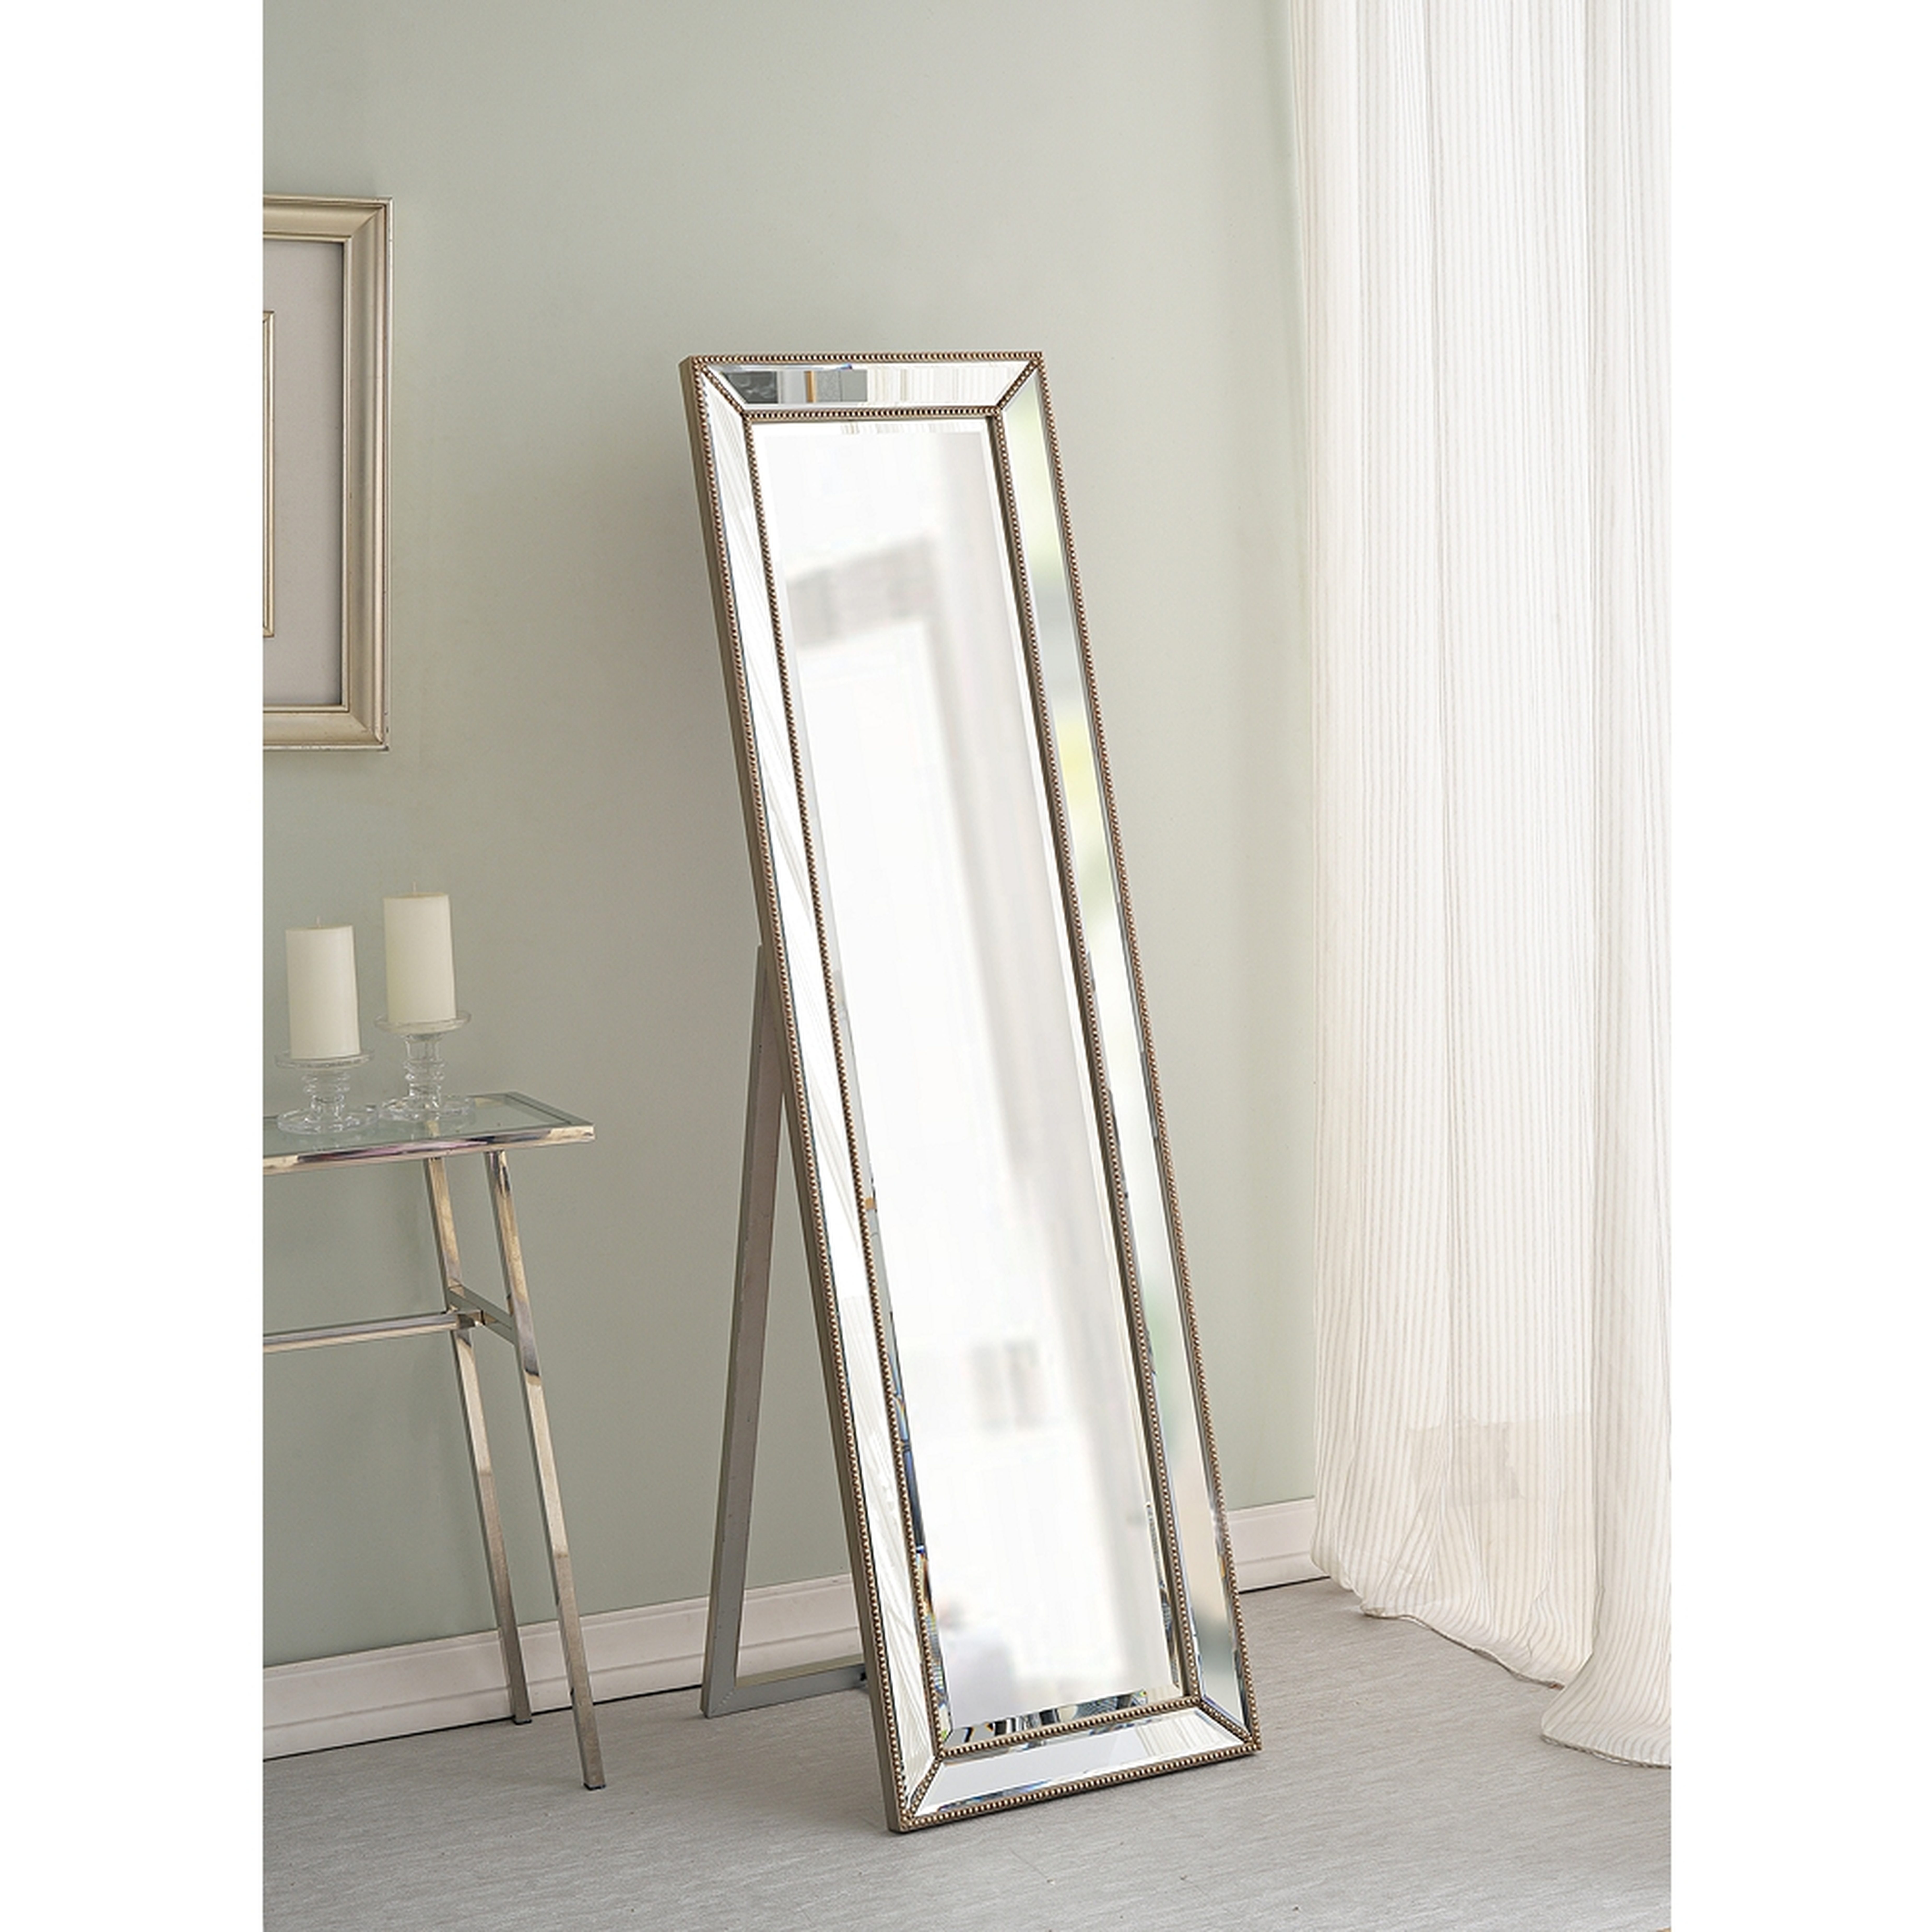 Kenroy Home Ridley Champagne 18 1/4" x 64" Floor Mirror - Style # 62X71 - Lamps Plus